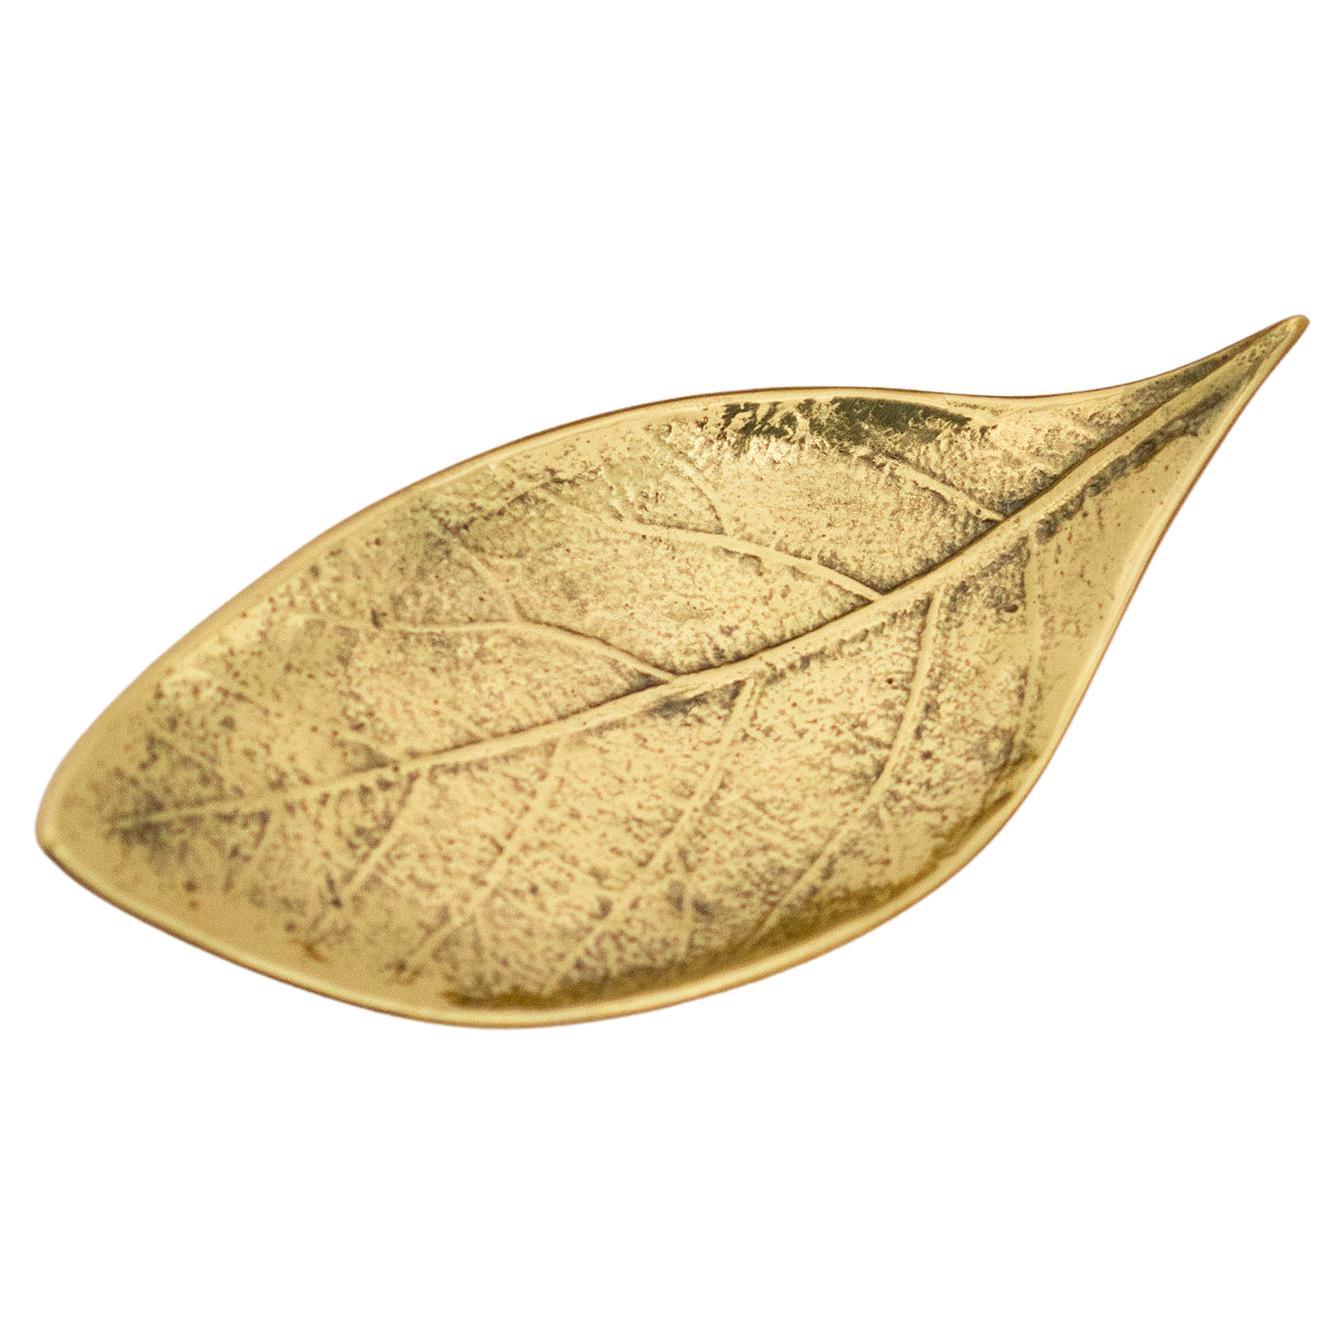 Decorative Handmade Cast Brass Leaf Vide Poche, Candle-holder, Small For Sale